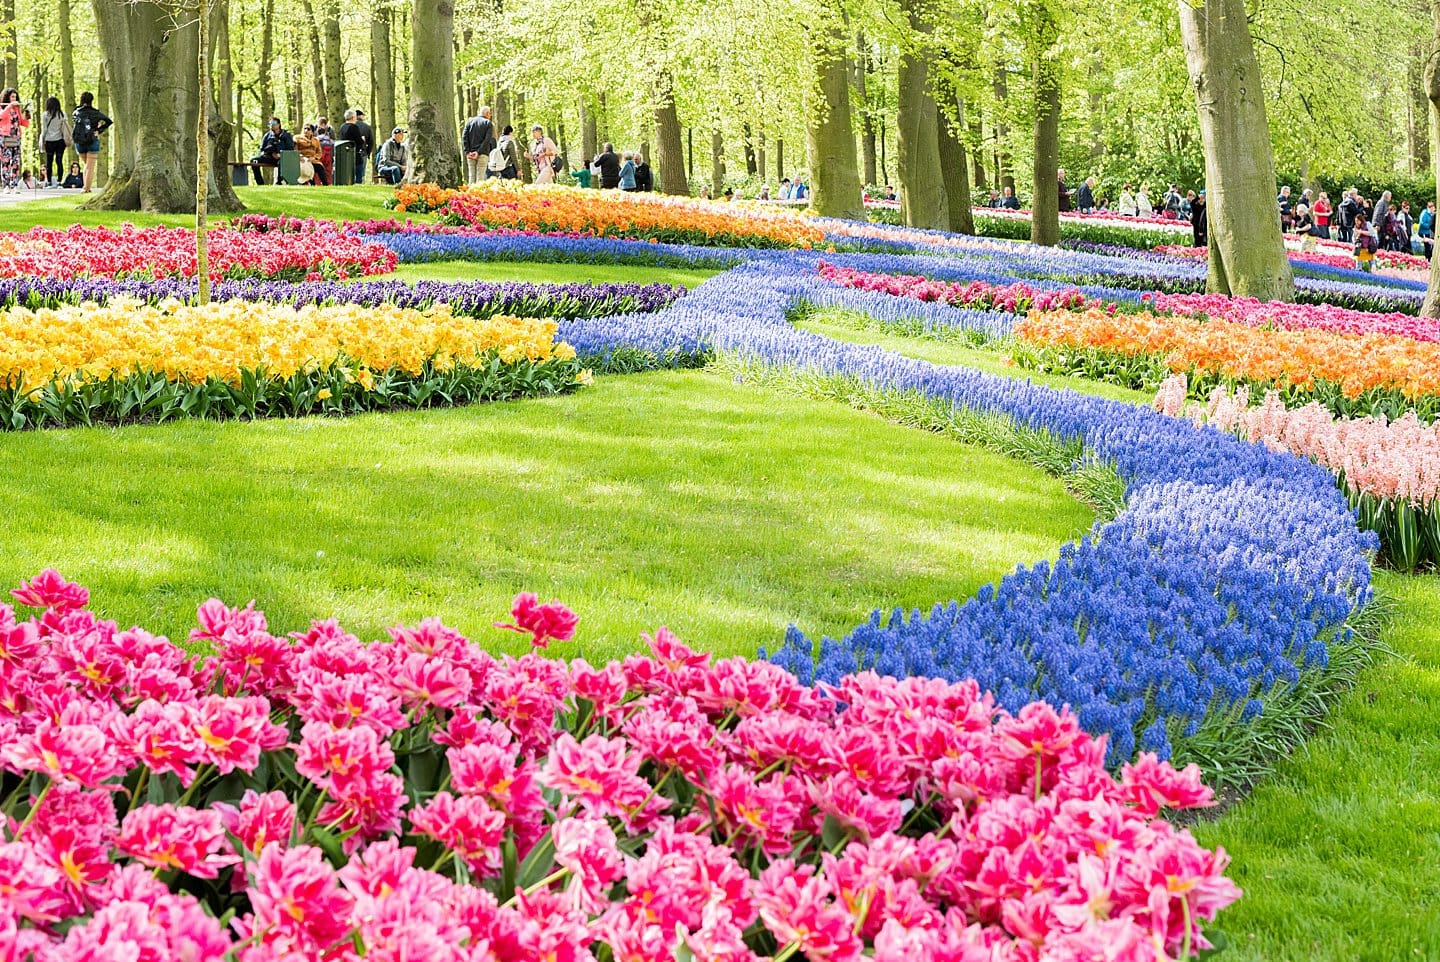 Travel from Amsterdam to Keukenhof to see flower gardens, tulip fields of your dreams and enjoy nature. Holland is home to Lisse, the festival city and bucket list event at one of the most beautiful European cities in the world during spring season in The Netherlands. The colors and beauty of the bulbs in bloom in our photography and tips in our articles will inspire you to vacation to this destination no matter where you live in the world. #Keukenhof #TulipFields #TulipGarden #SometimesHome